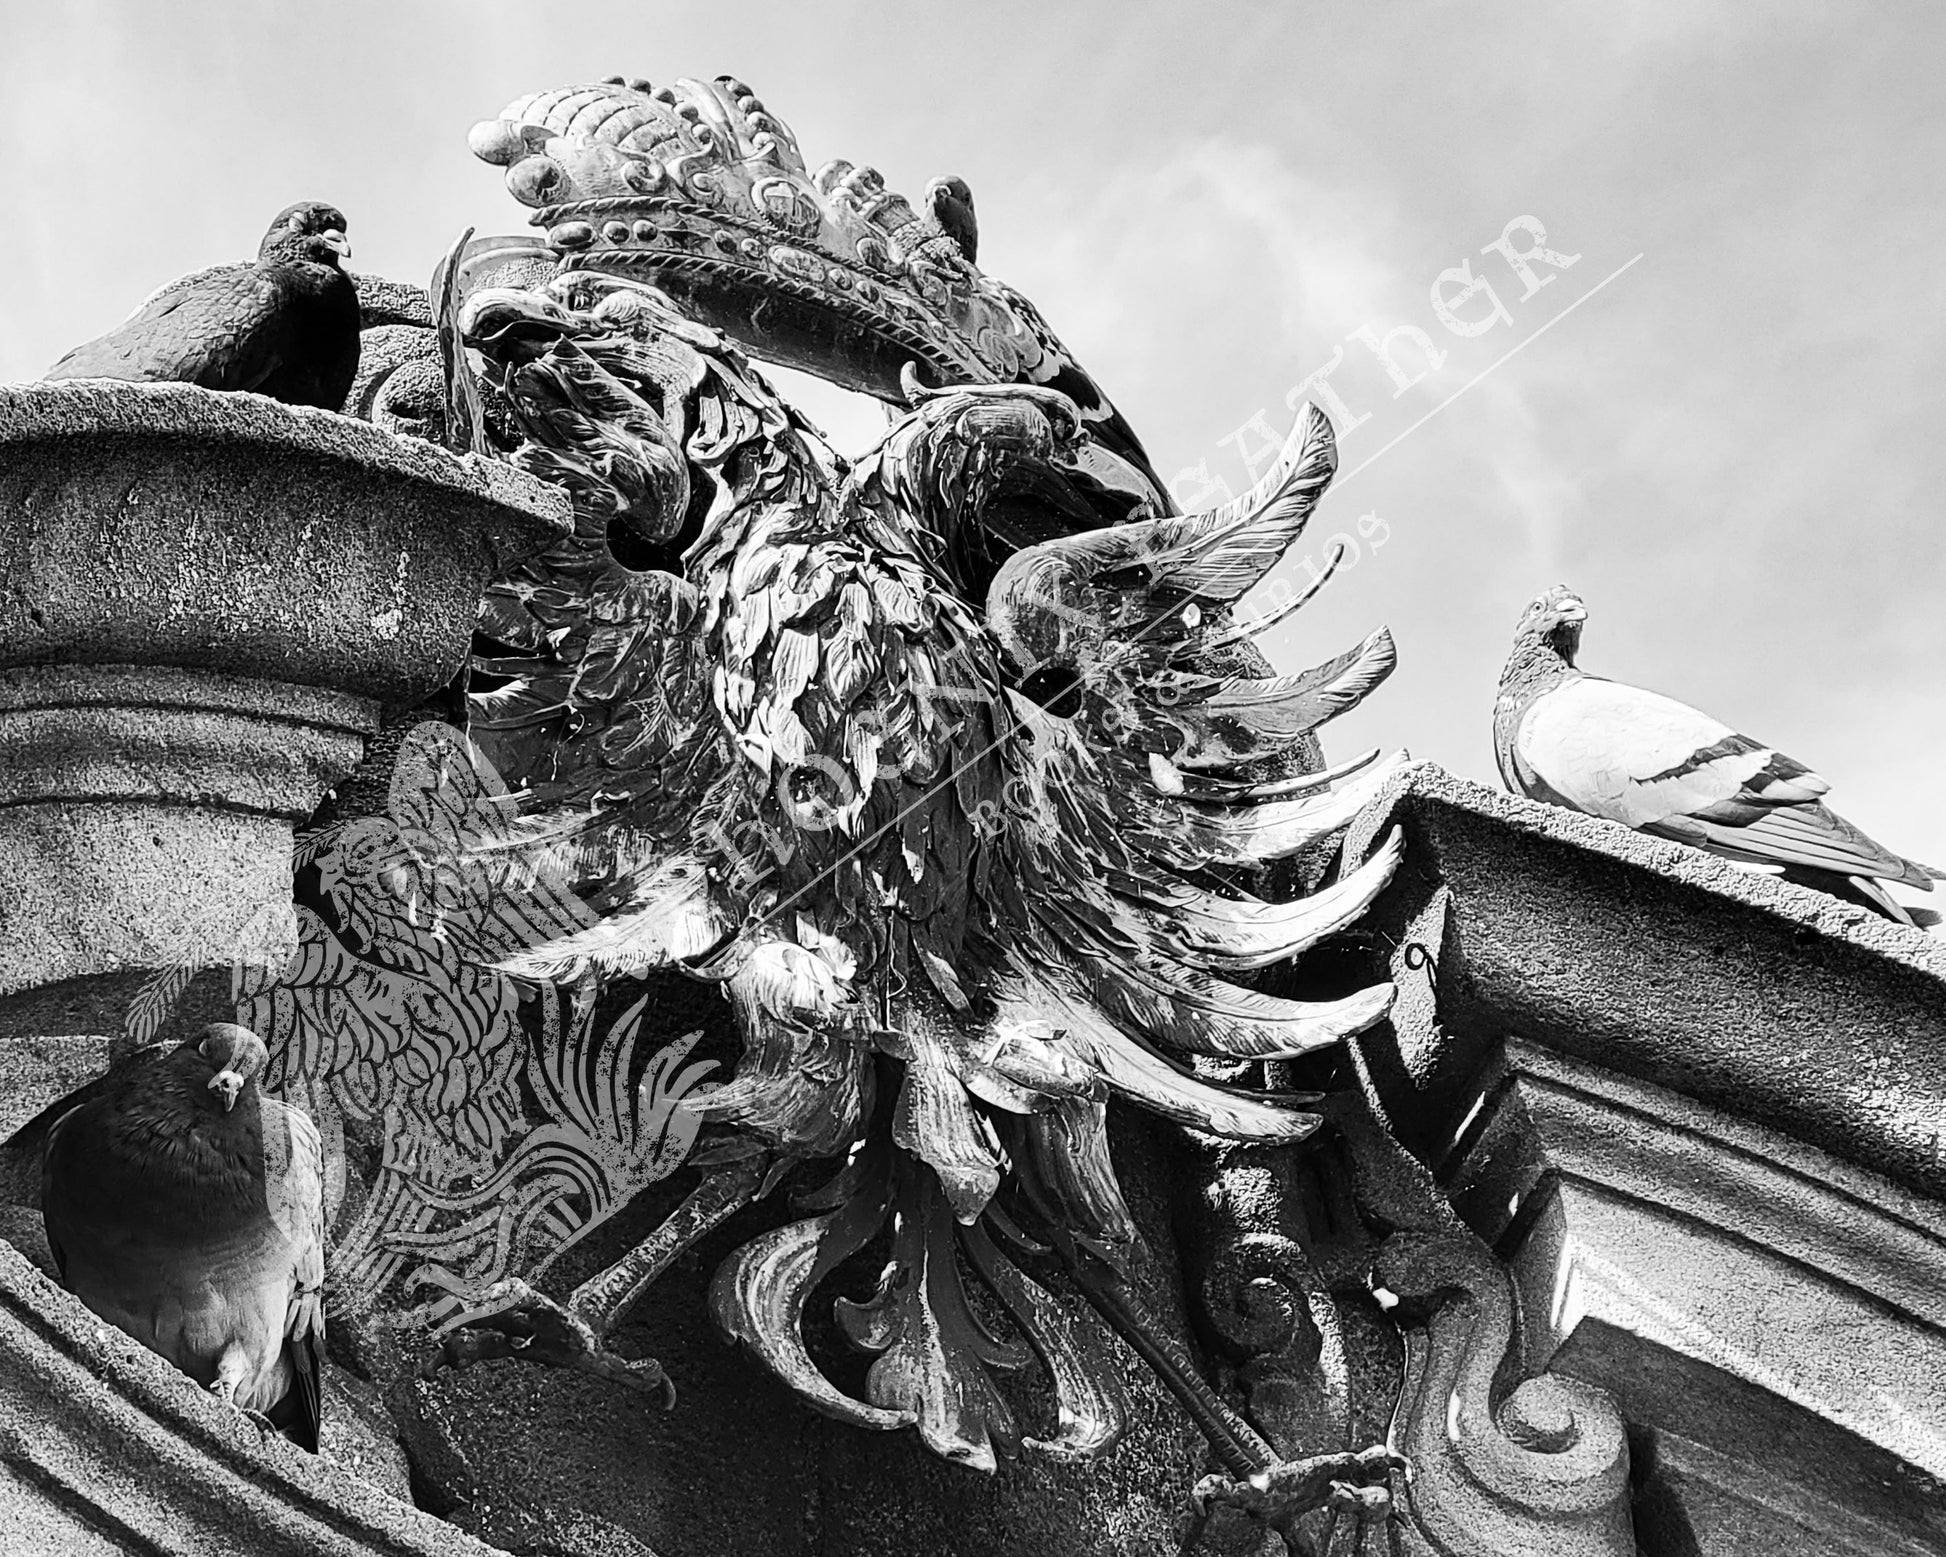 Travel photography for sale.  Gifts for history lovers and travelers. A dramatic black and white photograph from Nuremburg, Germany, showing pigeons on the German double-headed eagle crest. Size: 8"x 10" bird photo